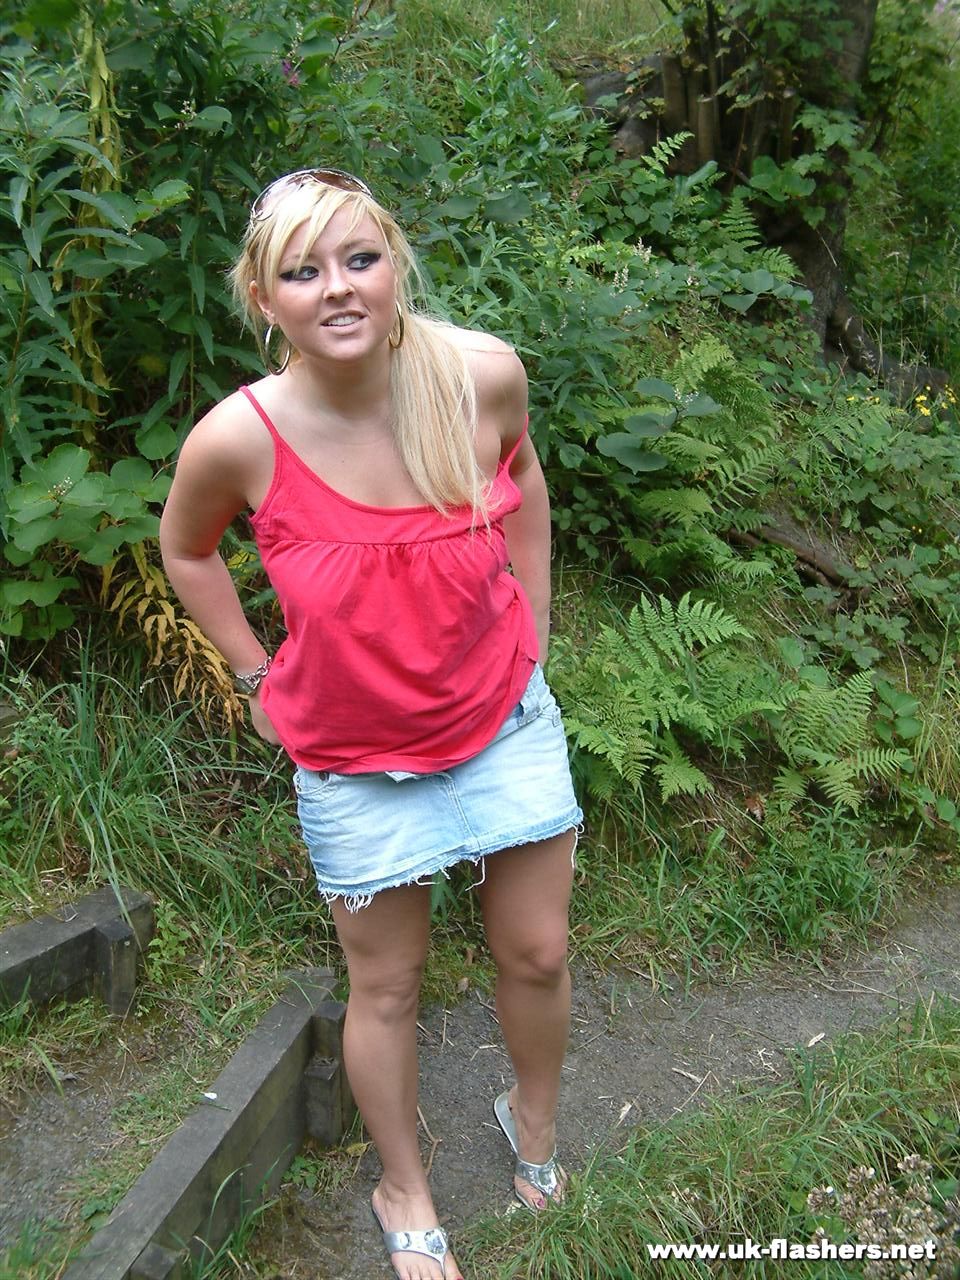 Overweight UK female with blonde hair strips naked on a popular walking trails foto porno #428197328 | UK Flashers Pics, Lena Leigh, Public, porno móvil